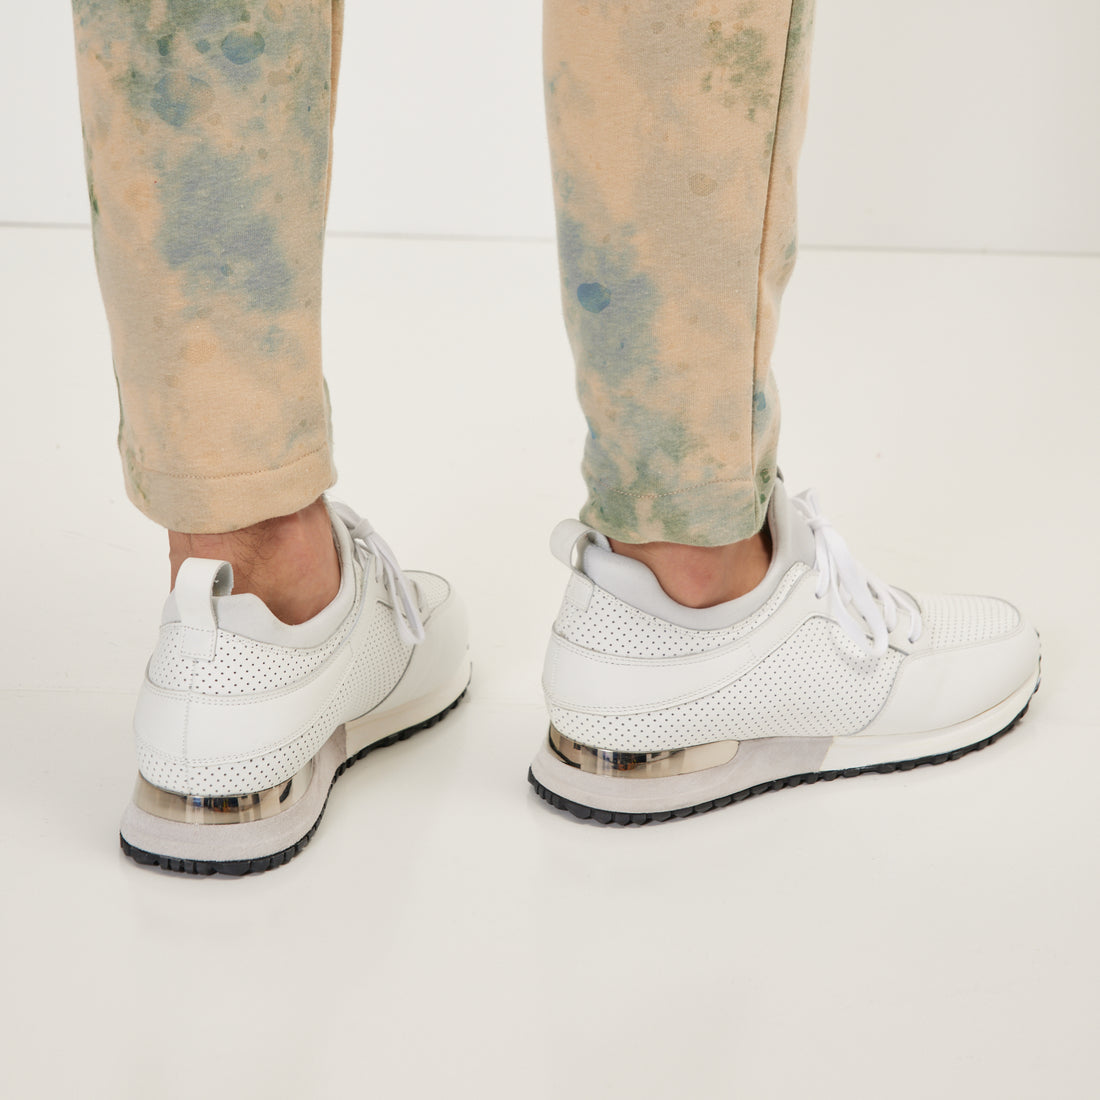 N°  D0532 THE PERFORATED LEATHER RUNNER SNEAKER - WHITE